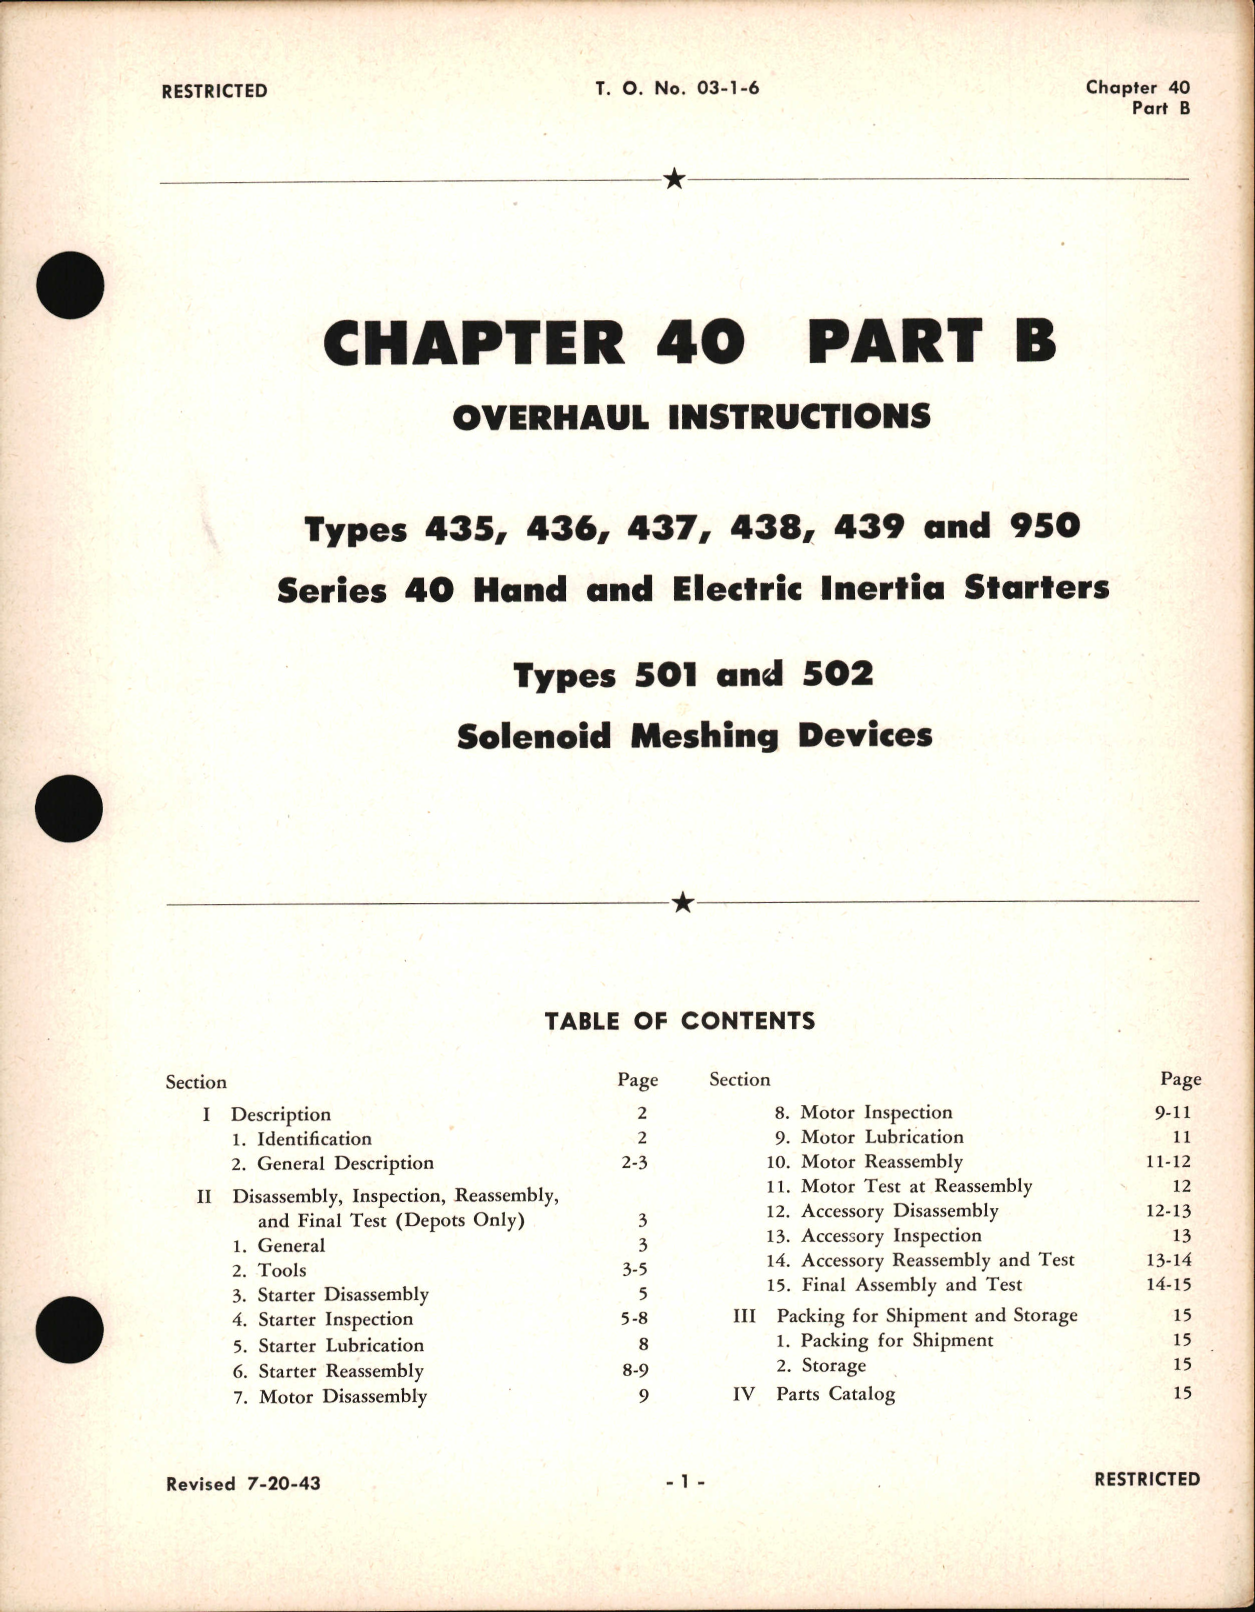 Sample page 1 from AirCorps Library document: Overhaul Instructions for Hand and Electric Inertia Starters and Solenoid Meshing Devices, Chapter 40 Part B